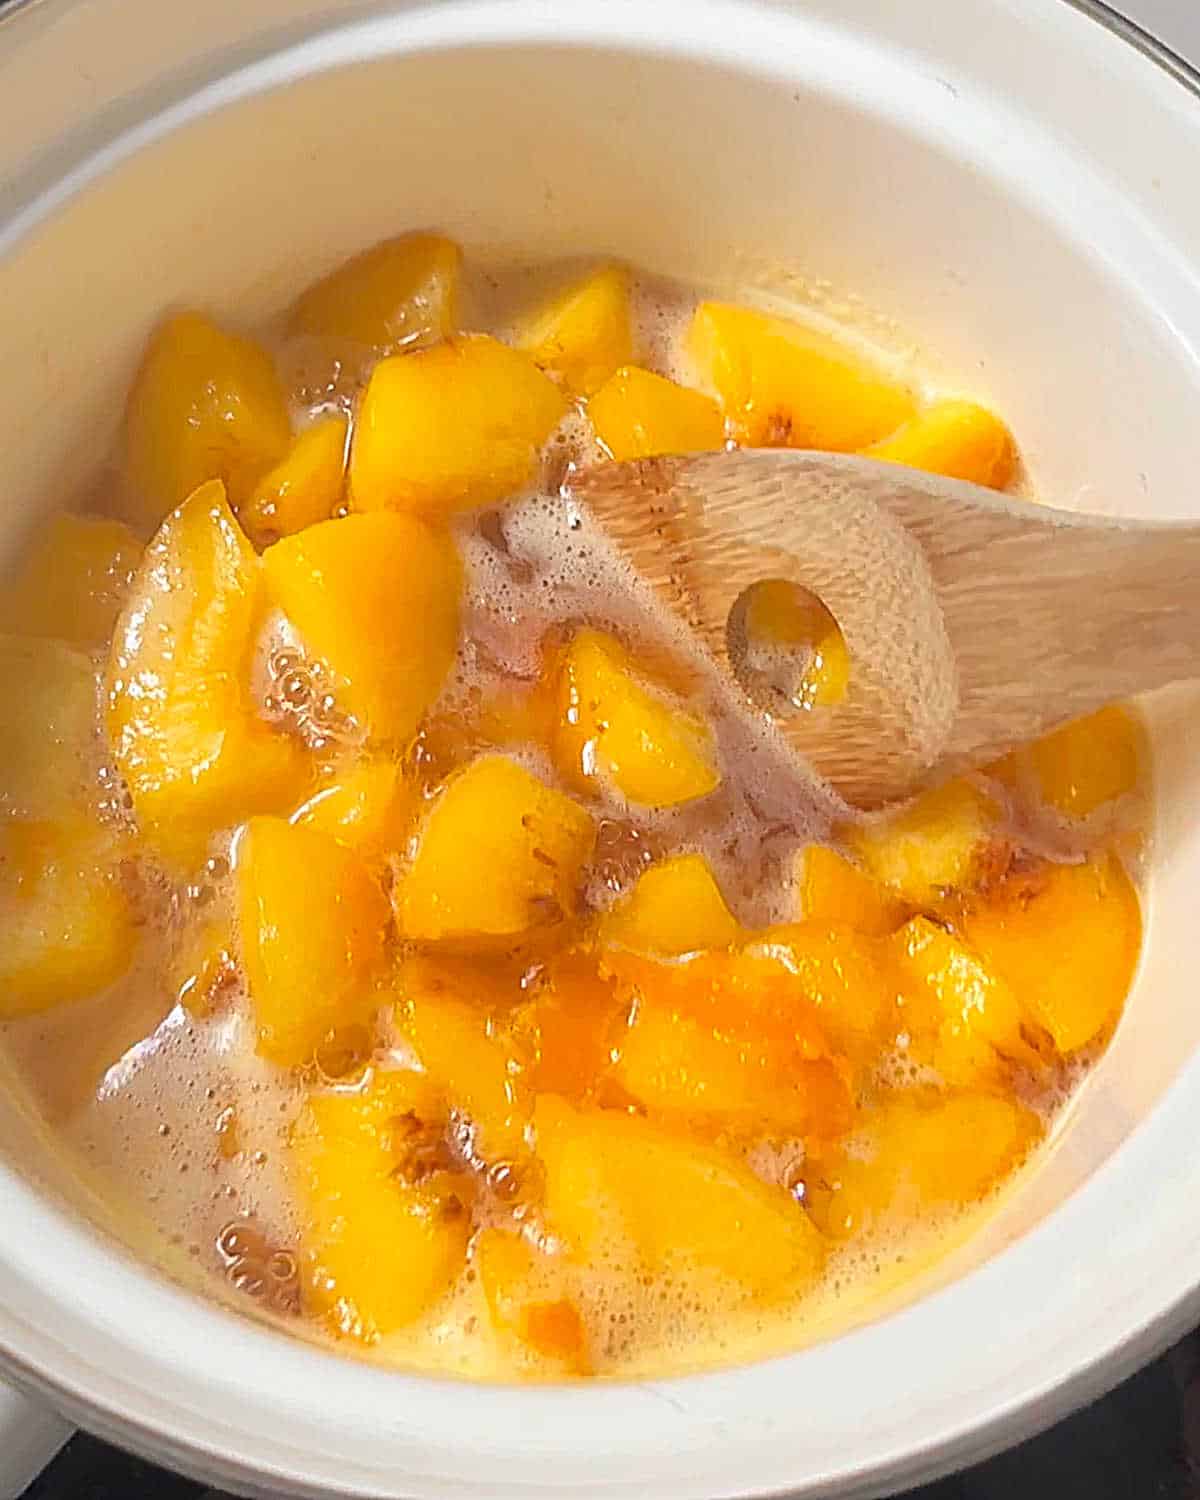 Wooden spoon mixing a peach compote simmering in a white saucepan.